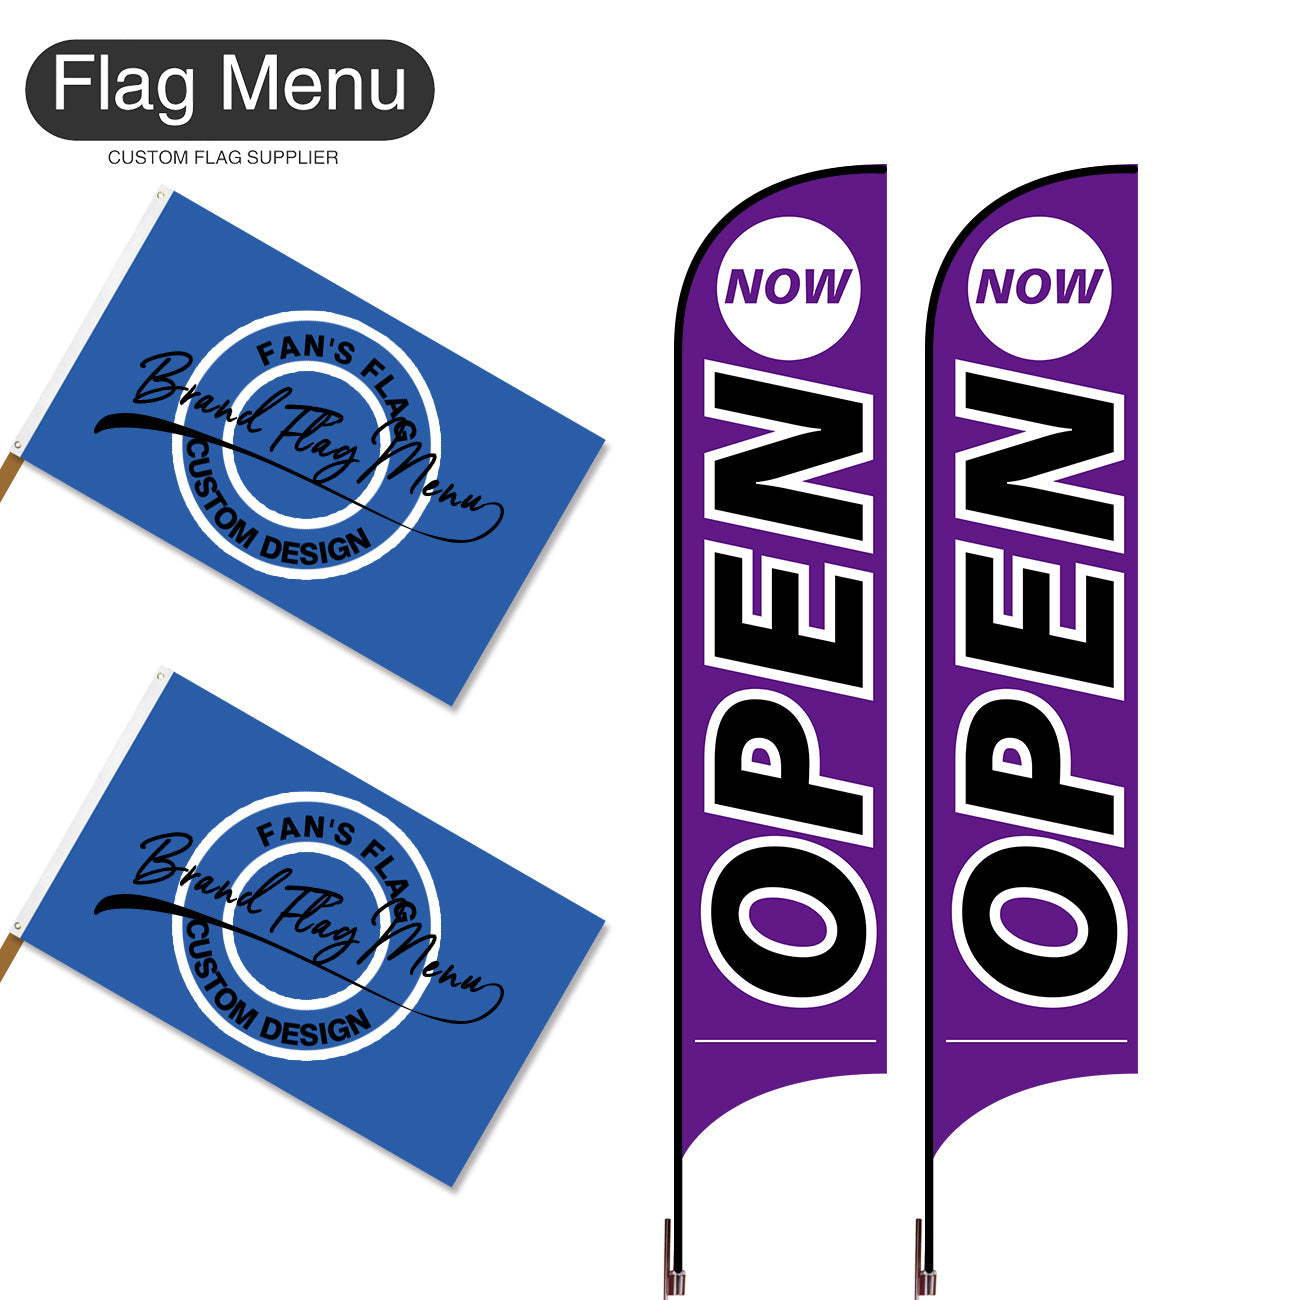 Outdoor Advertising Set - B-Purple A-S - Feather Flag -Double Sided & 3'x5' Regular Flag -Single Sided-Cross & Water Bag-Flag Menu